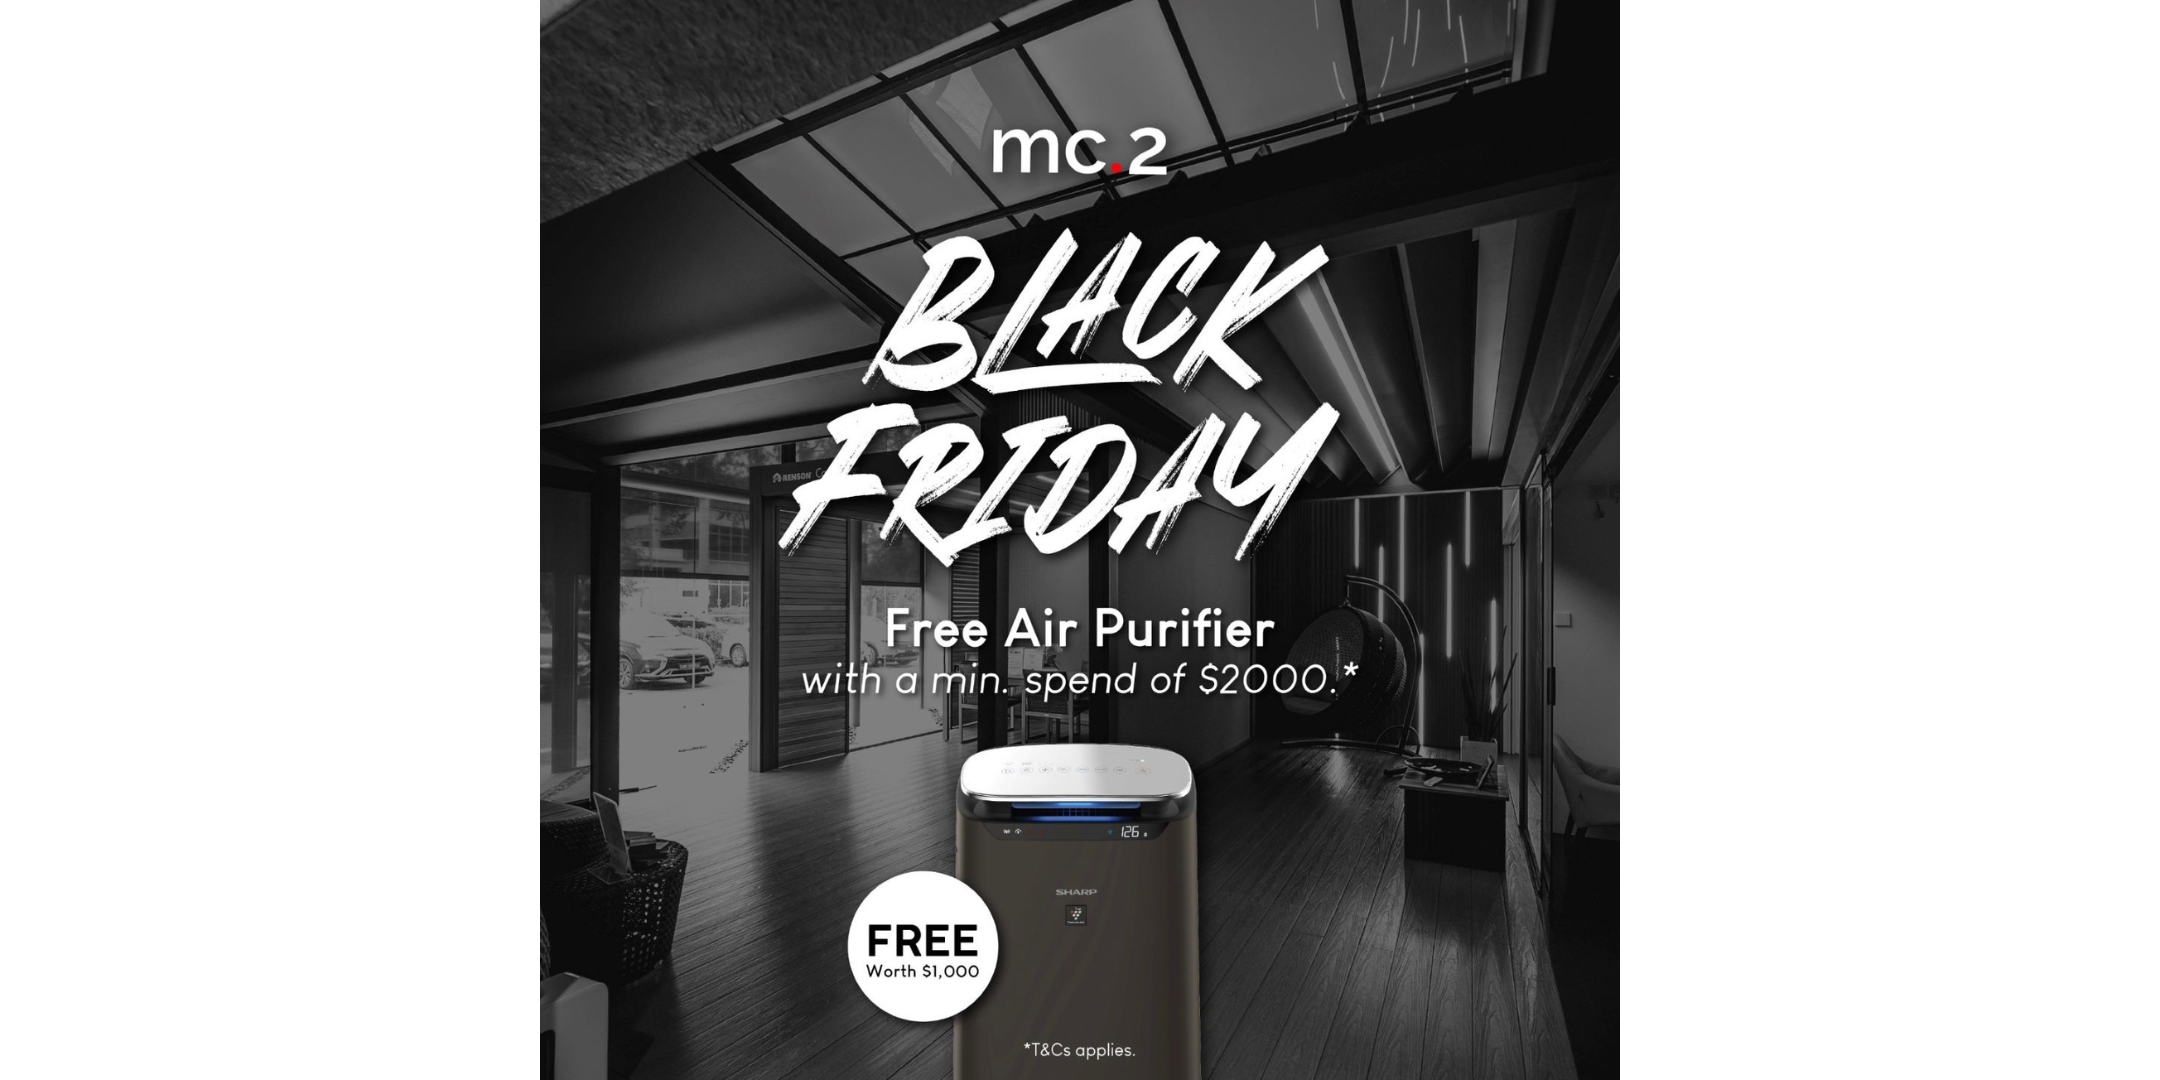 [Black Friday Exclusive] Free Sharp Air Purifier with A Min Spending of $2,000 at mc.2!